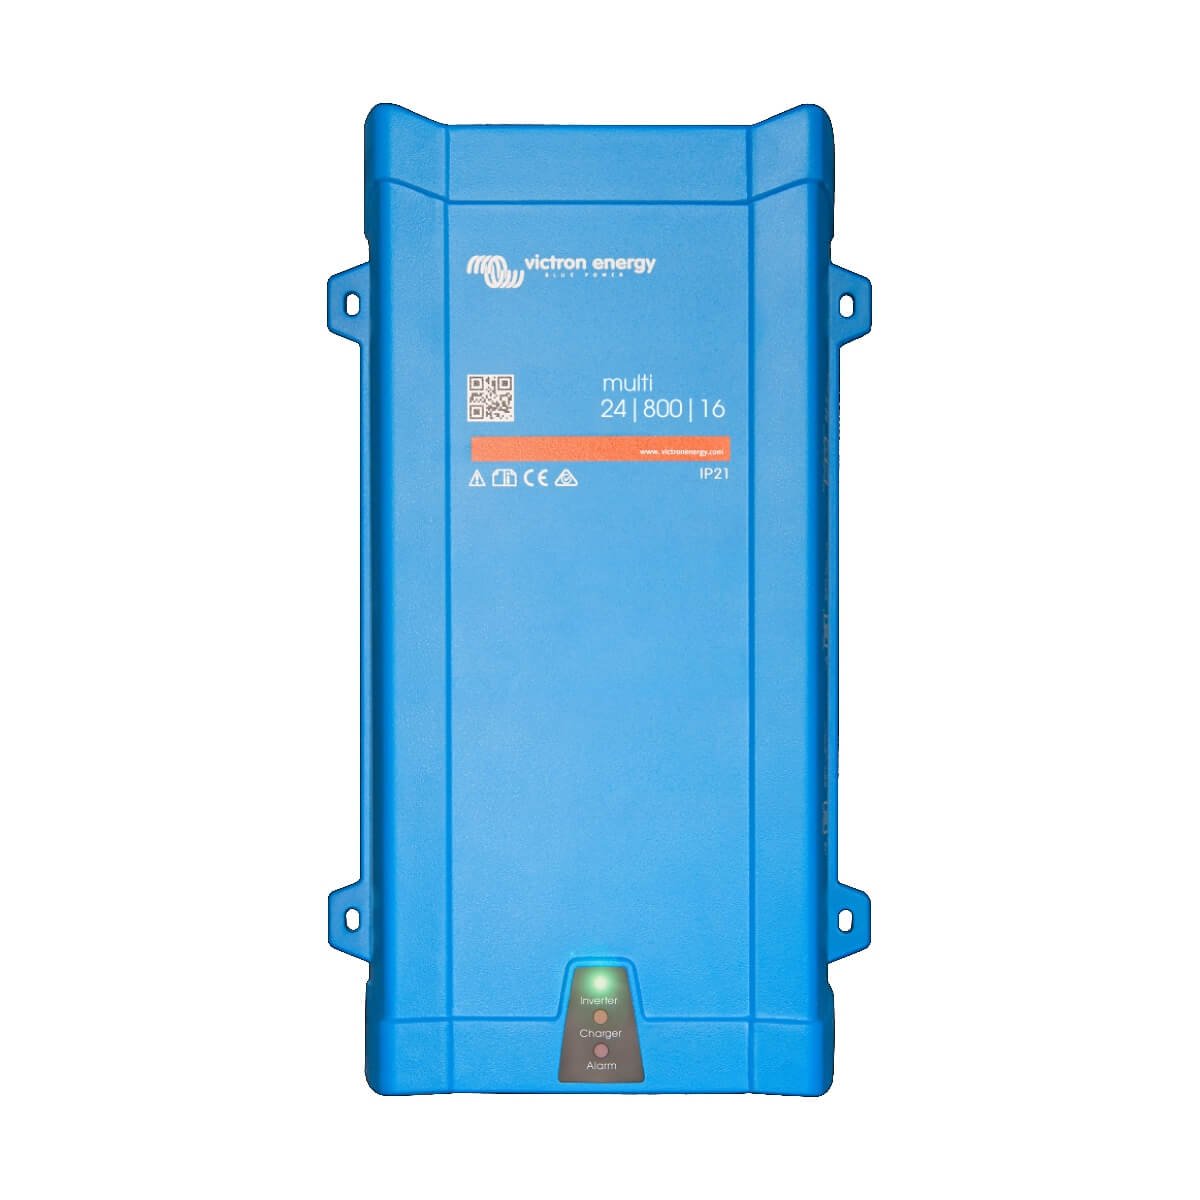 Featuring the reliable Victron MultiPlus 24V 800VA Inverter/Charger, this blue energy inverter/charger boasts a model label "multi 24/800/16" and indicator lights on the front. It's equipped with an 800VA charger and a 24V inverter for seamless power management.